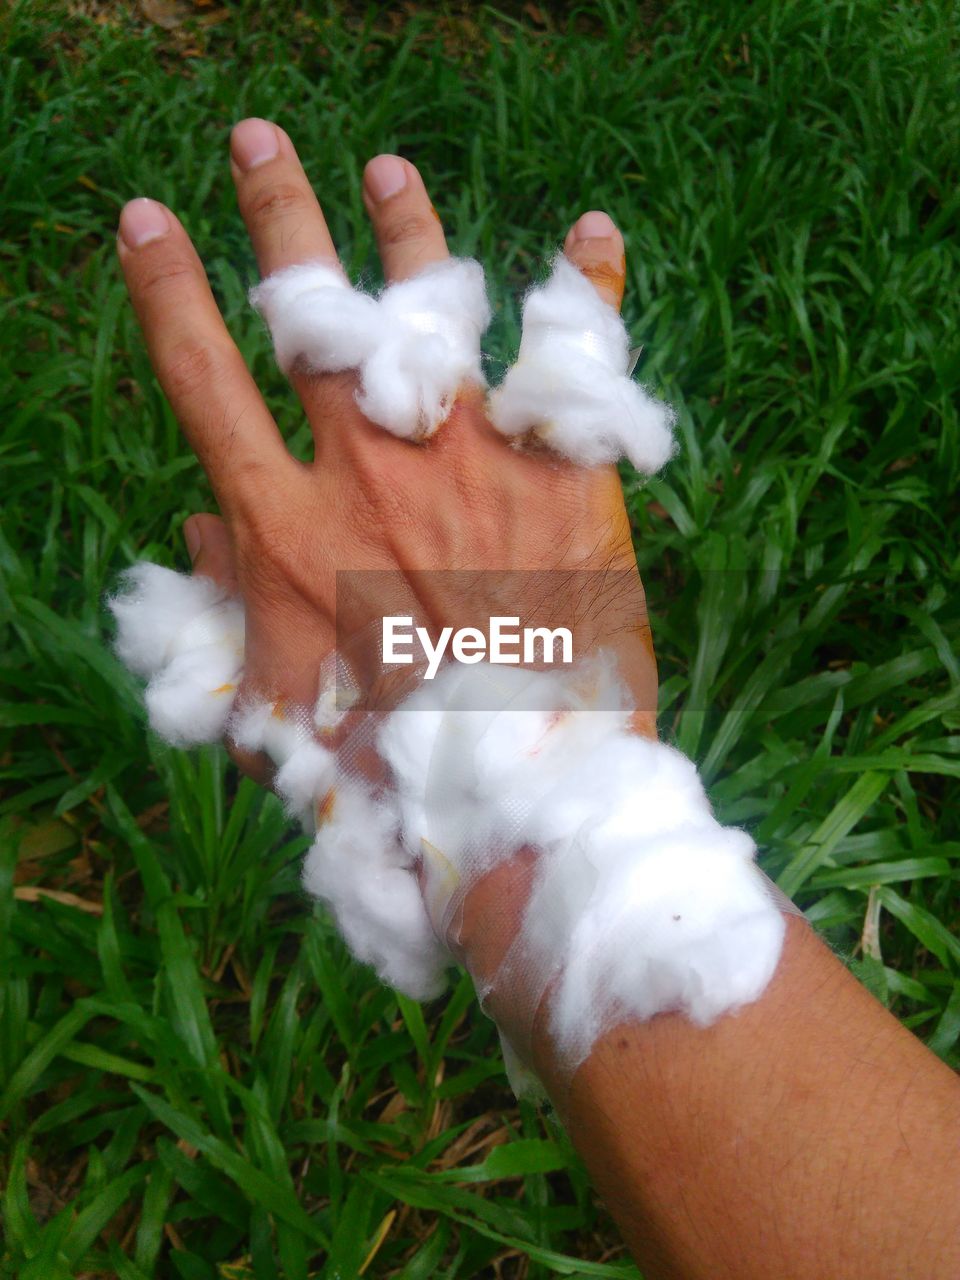 Cropped hand with cotton over grassy field